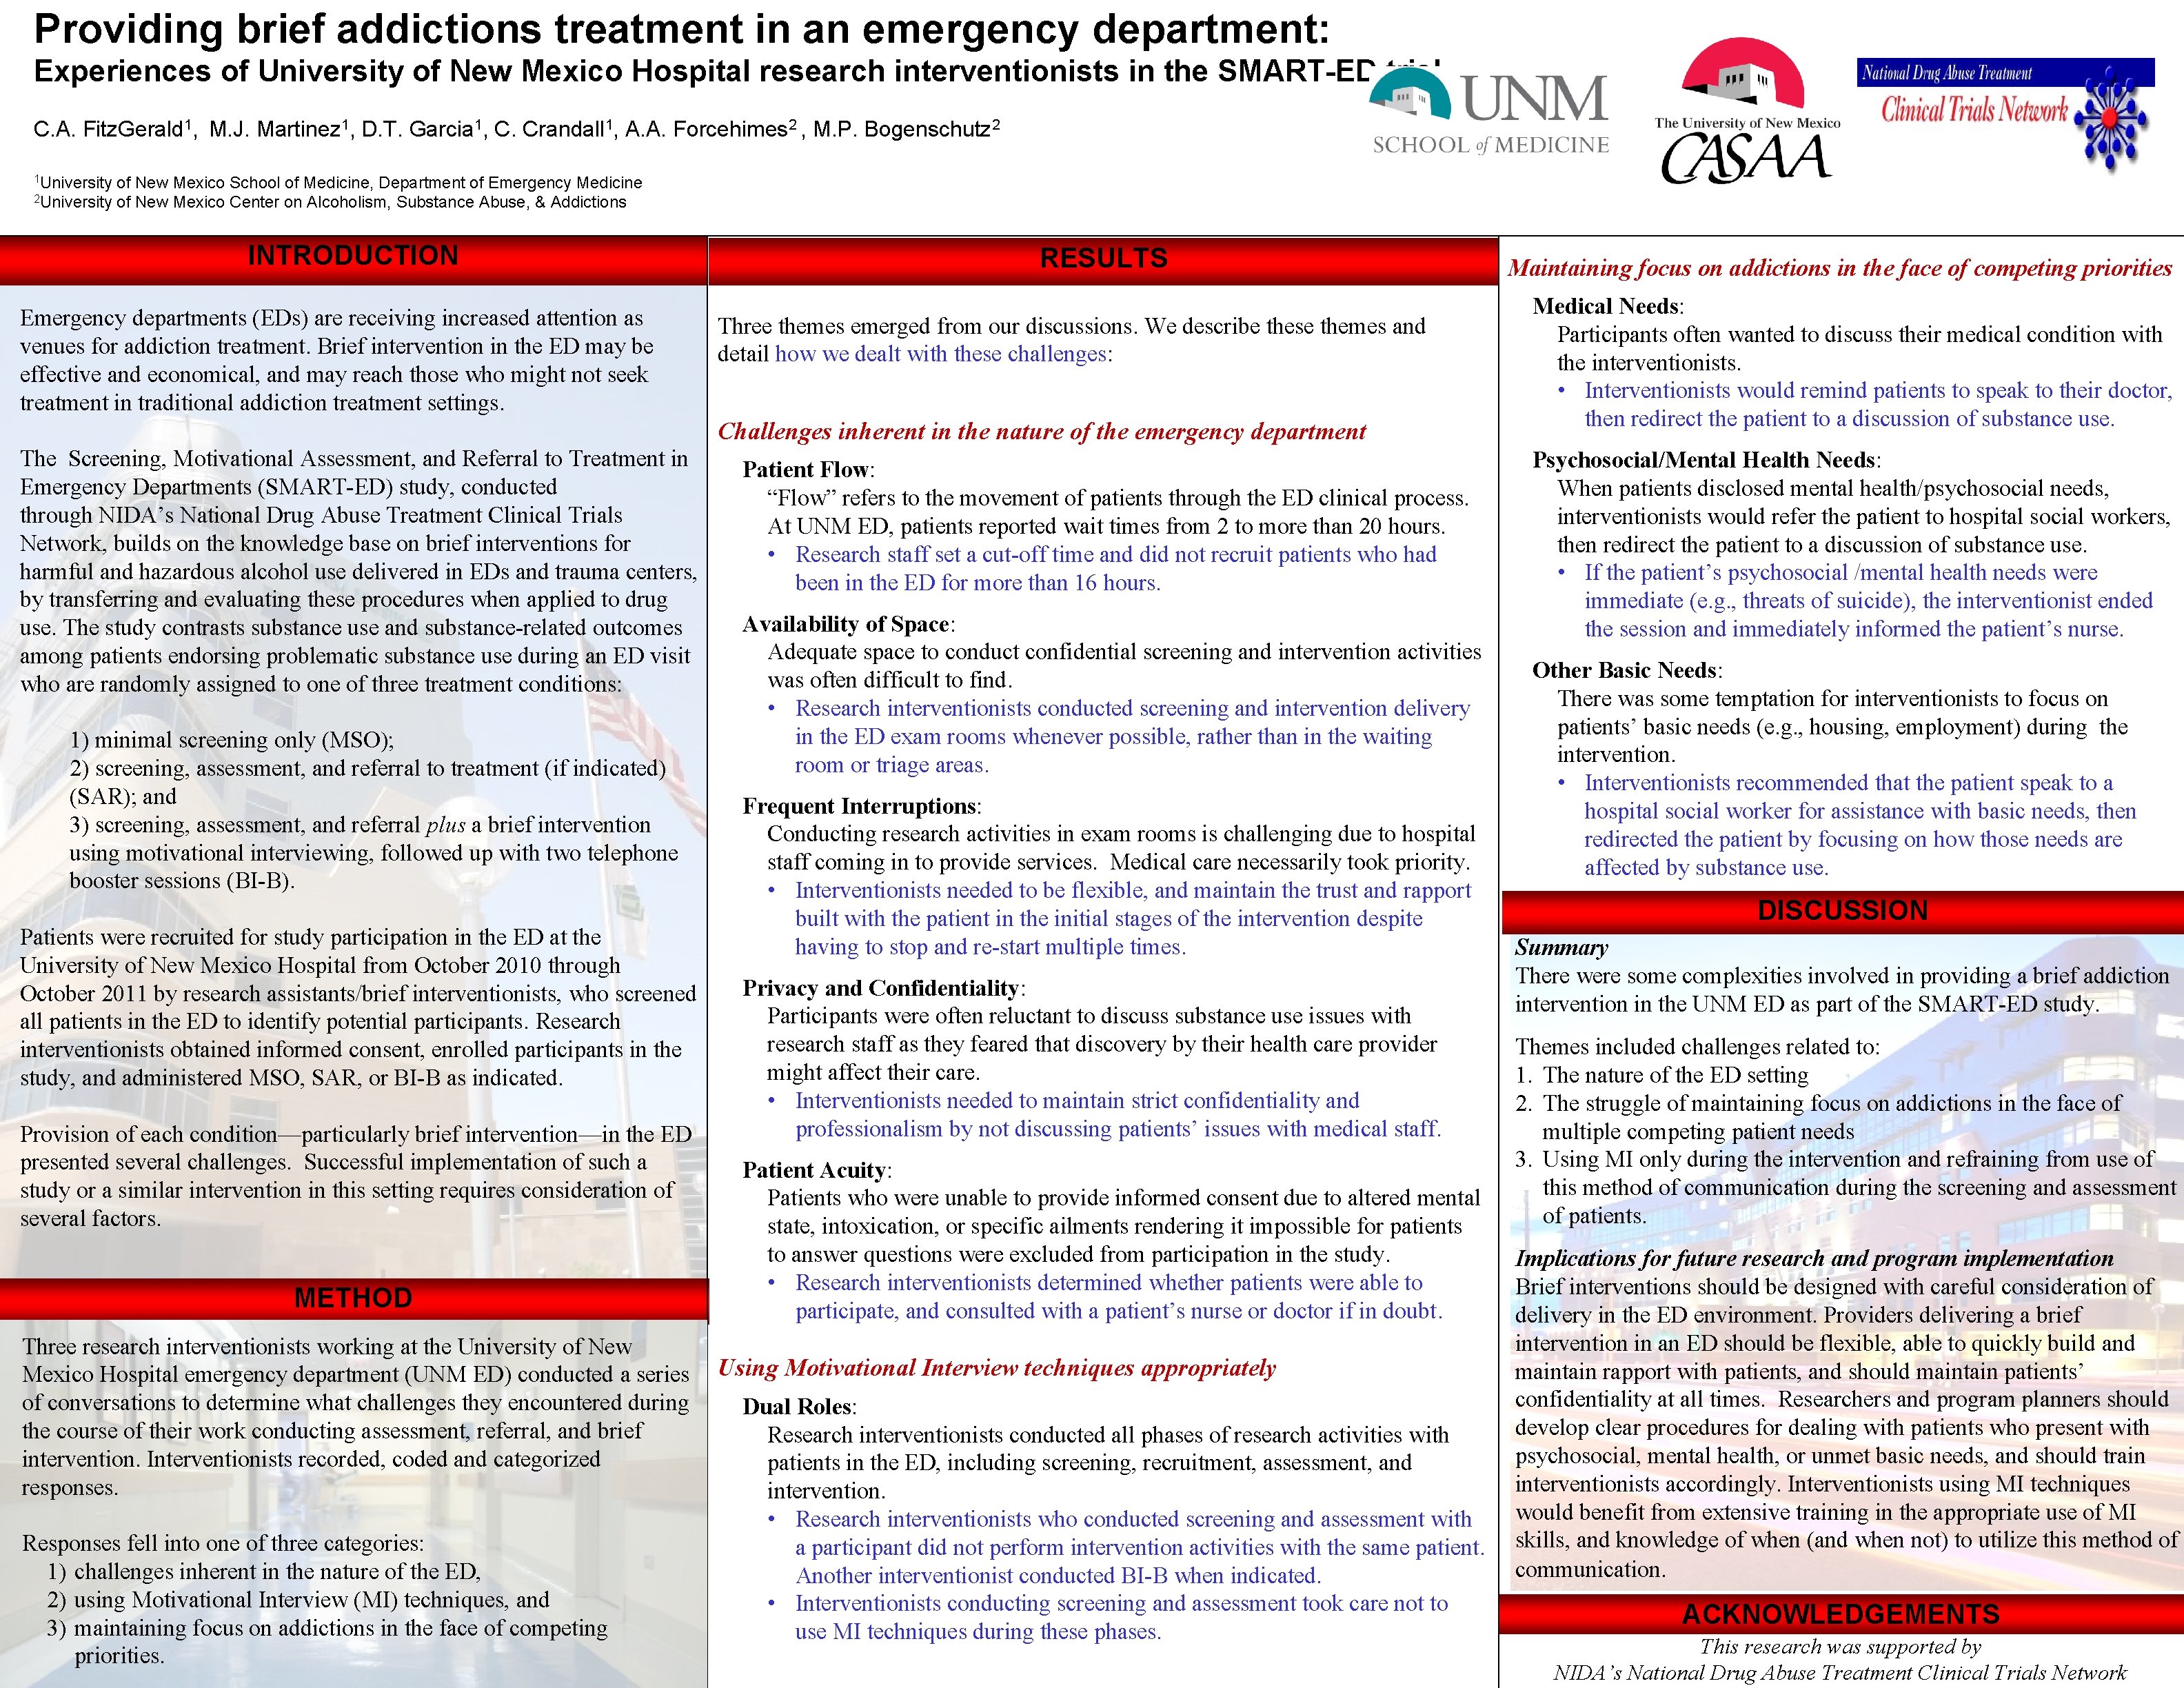 Providing brief addictions treatment in an emergency department: Experiences of University of New Mexico